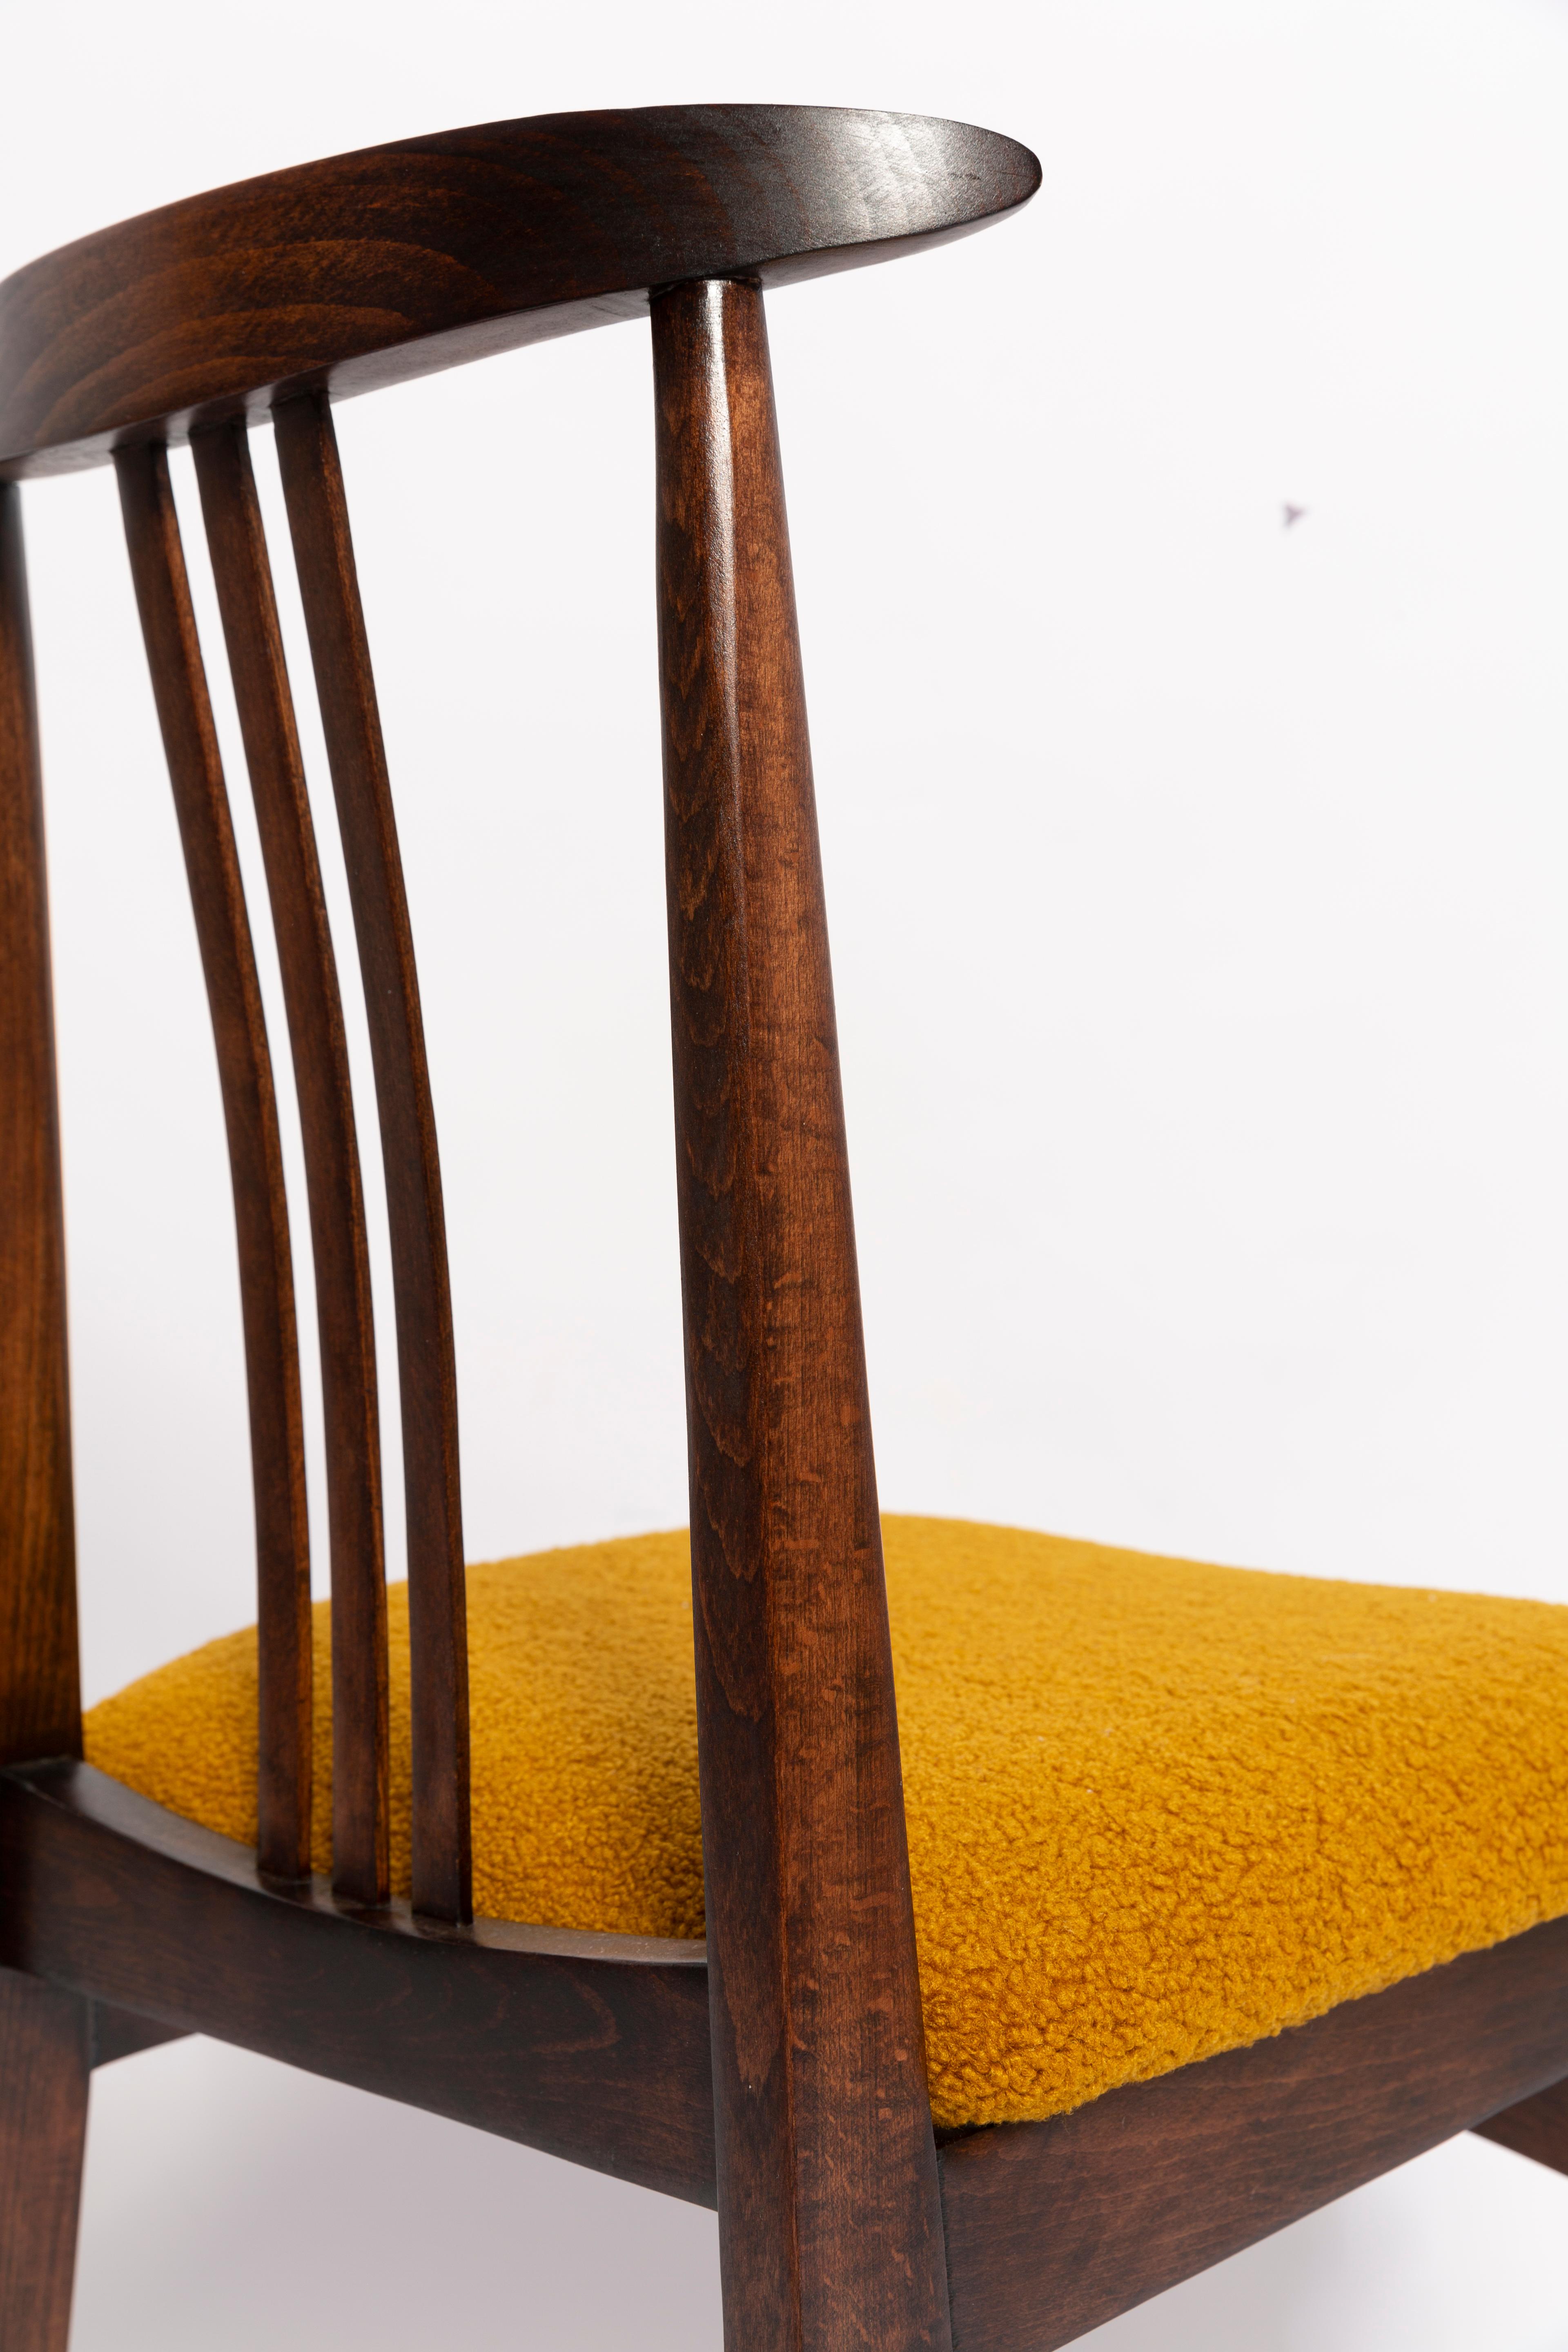 Hand-Crafted Six Mid-Century Ochre Boucle Chairs, Walnut Wood, M. Zielinski, Europe 1960s For Sale